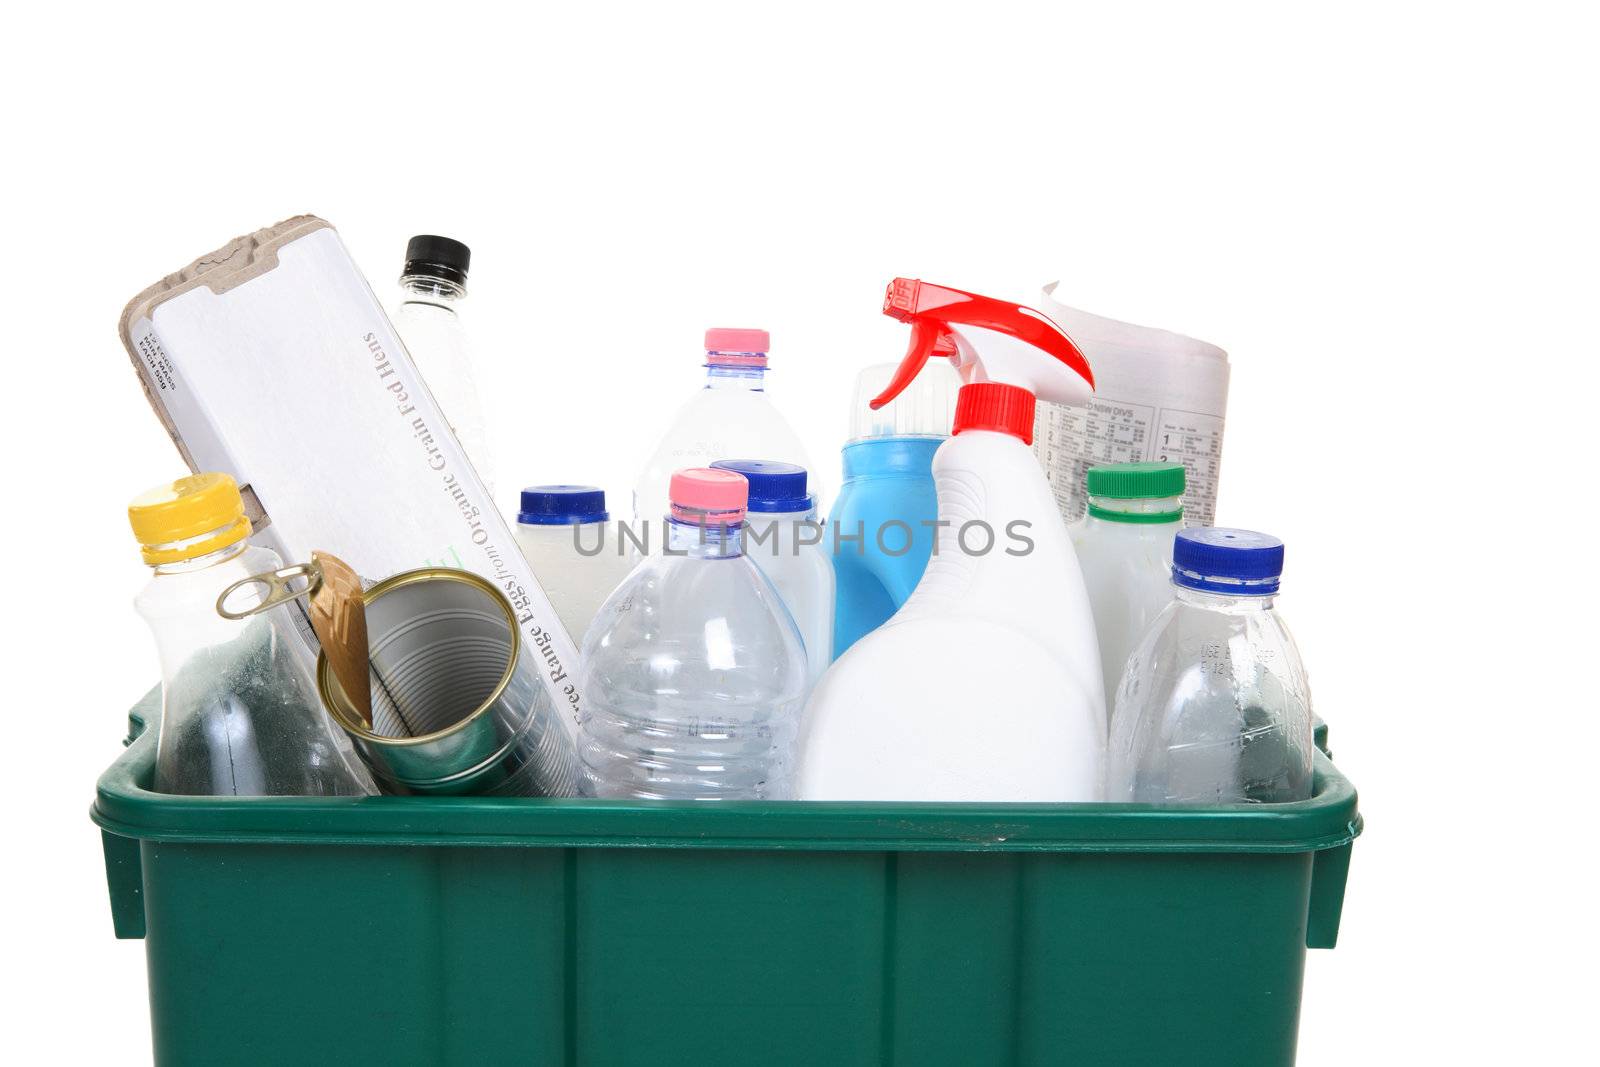 Items for recycling by lovleah